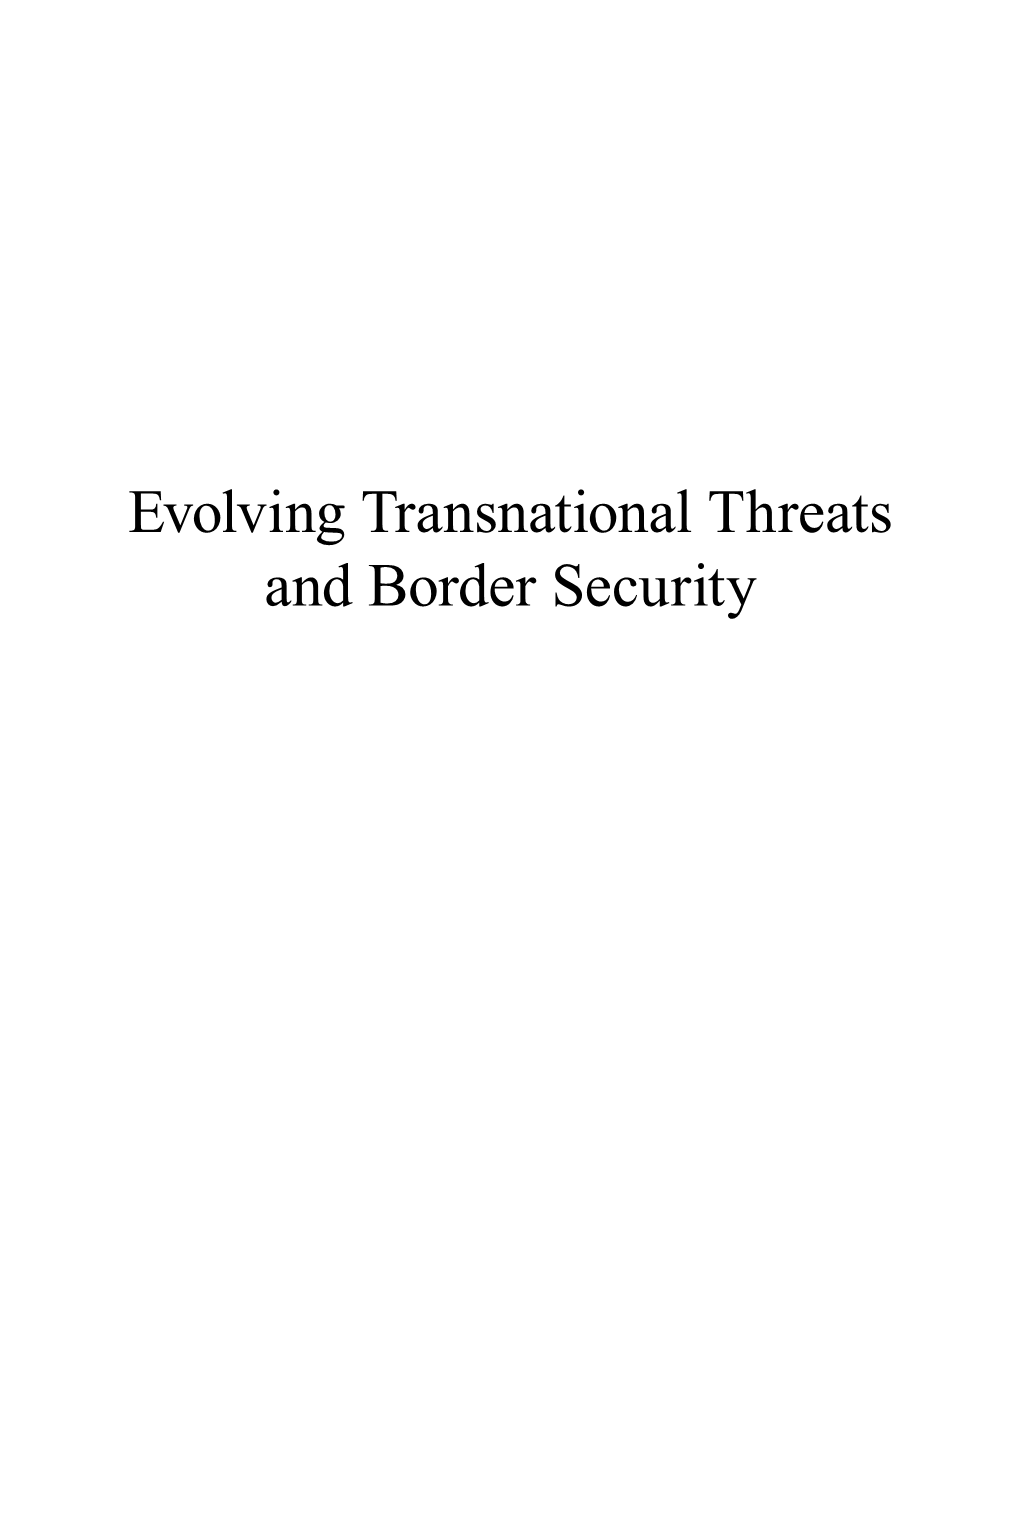 Evolving Transnational Threats and Border Security